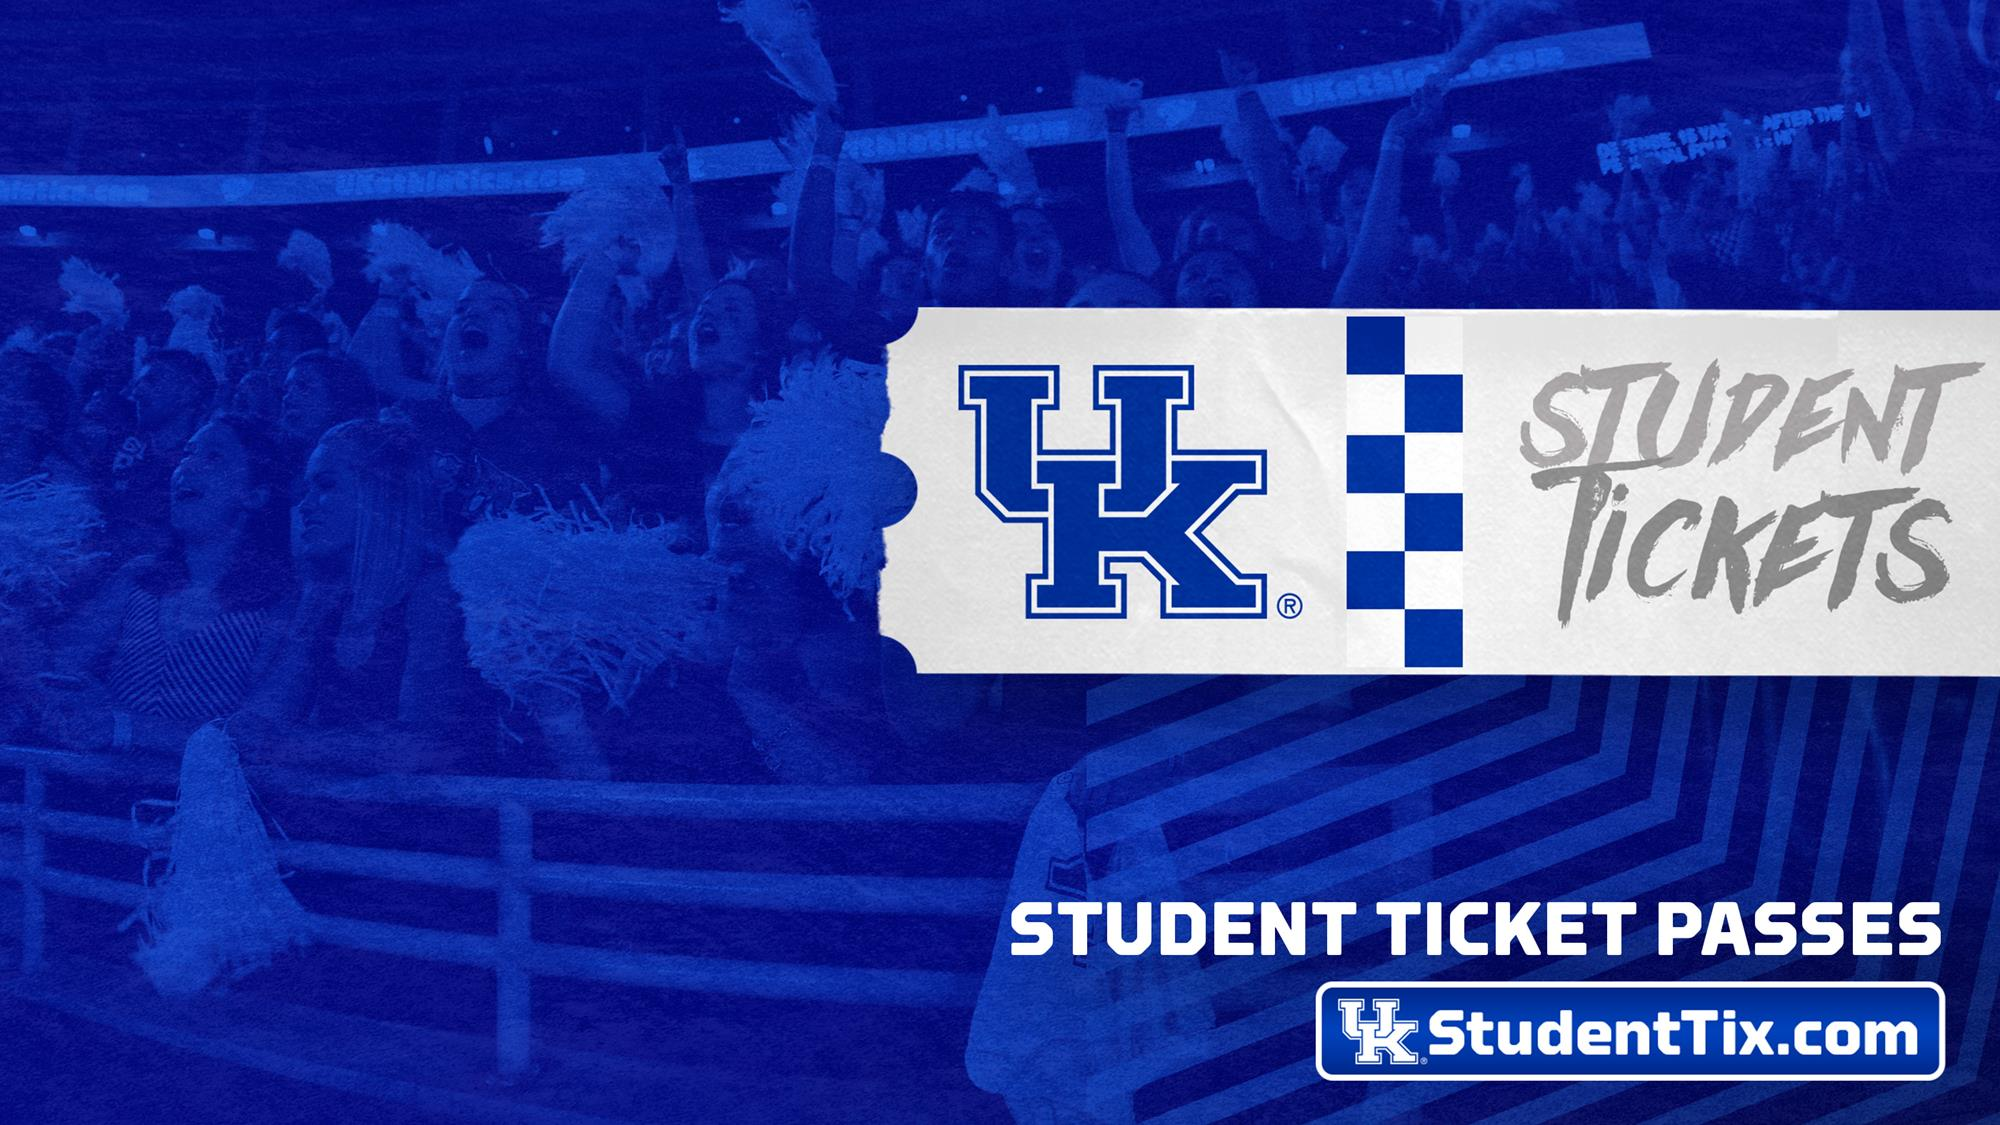 UK’s Student Ticketing Process Goes Mobile